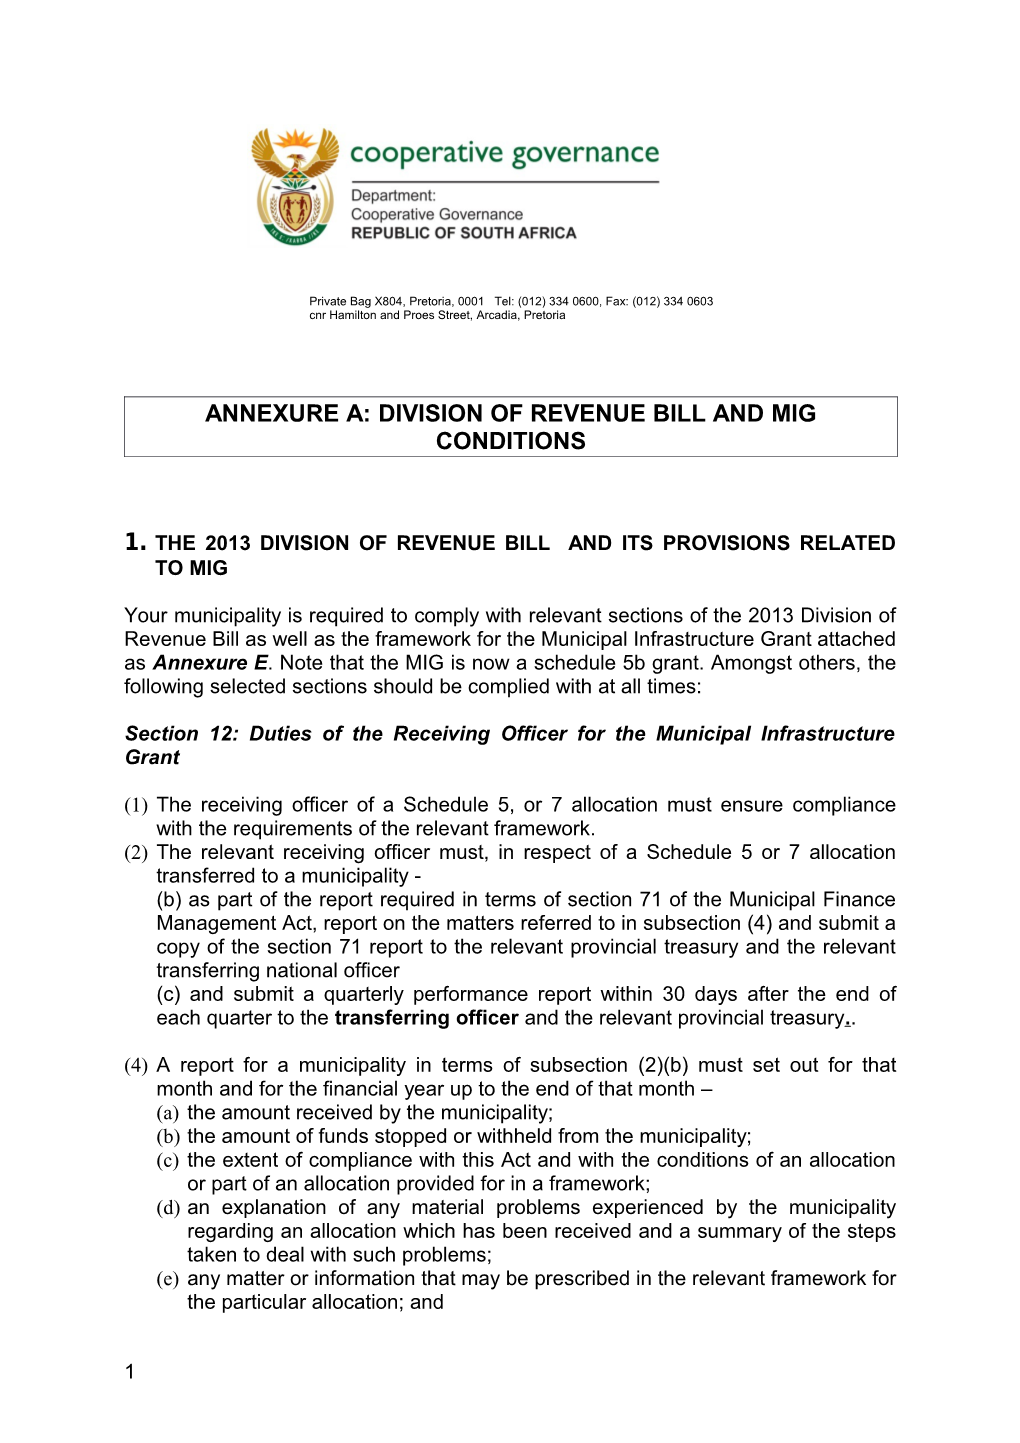 Annexure A: Division of Revenue Bill and Mig Conditions